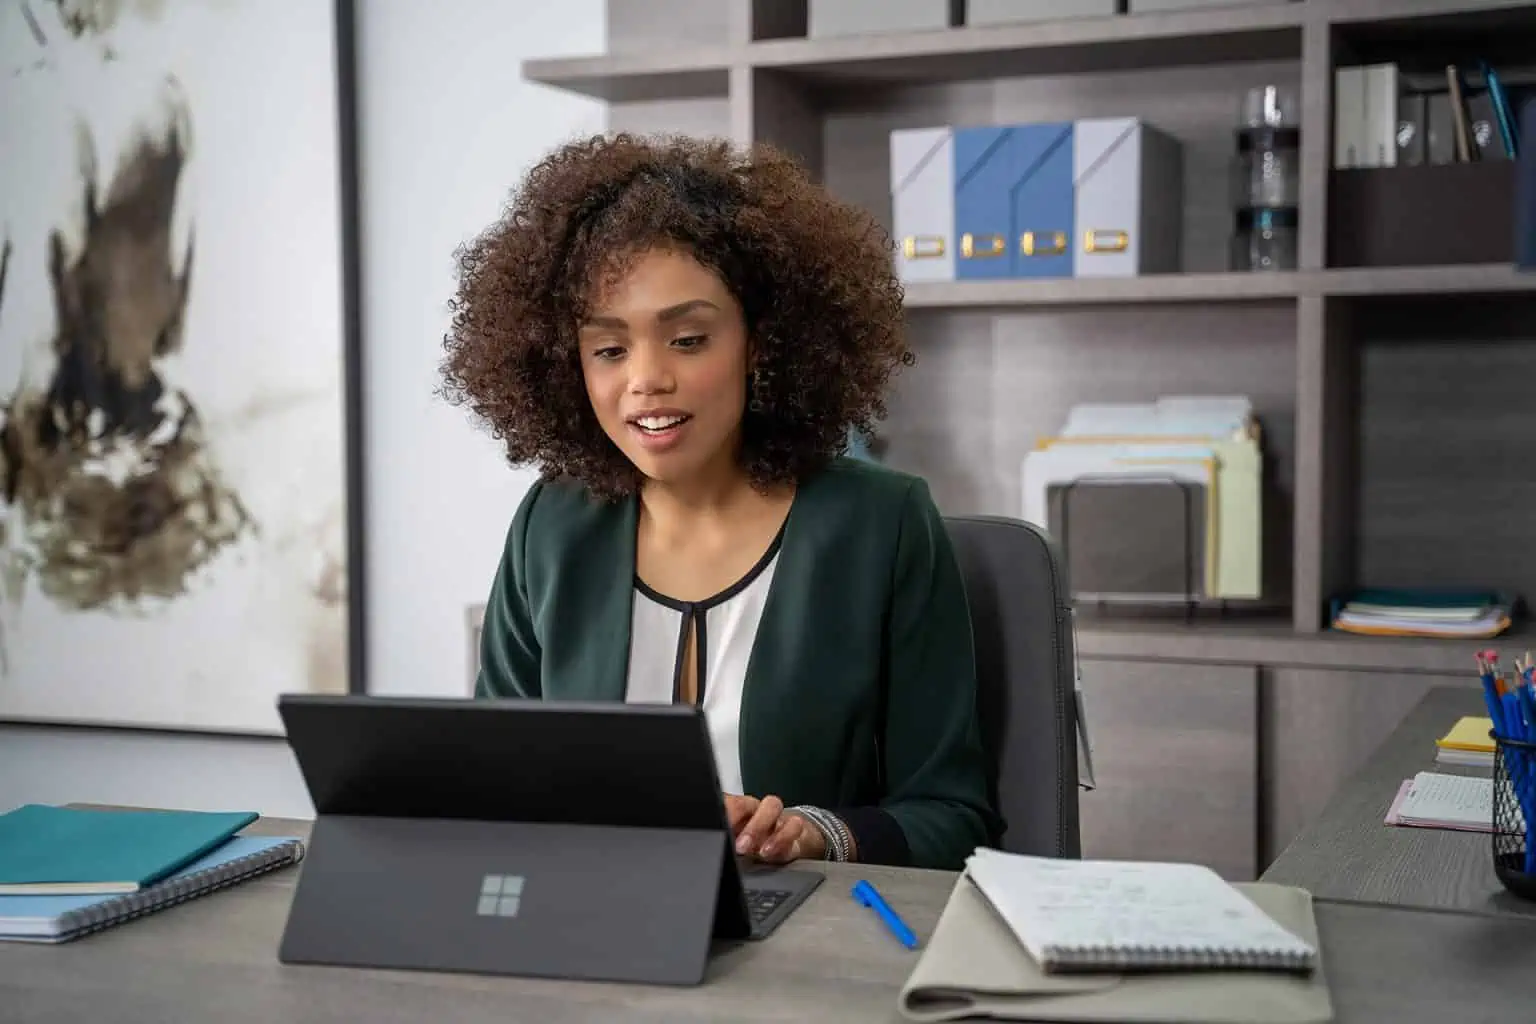 Microsoft’s new ‘Dynamics 365 Copilot’ aims to automate repetitive tasks for businesses